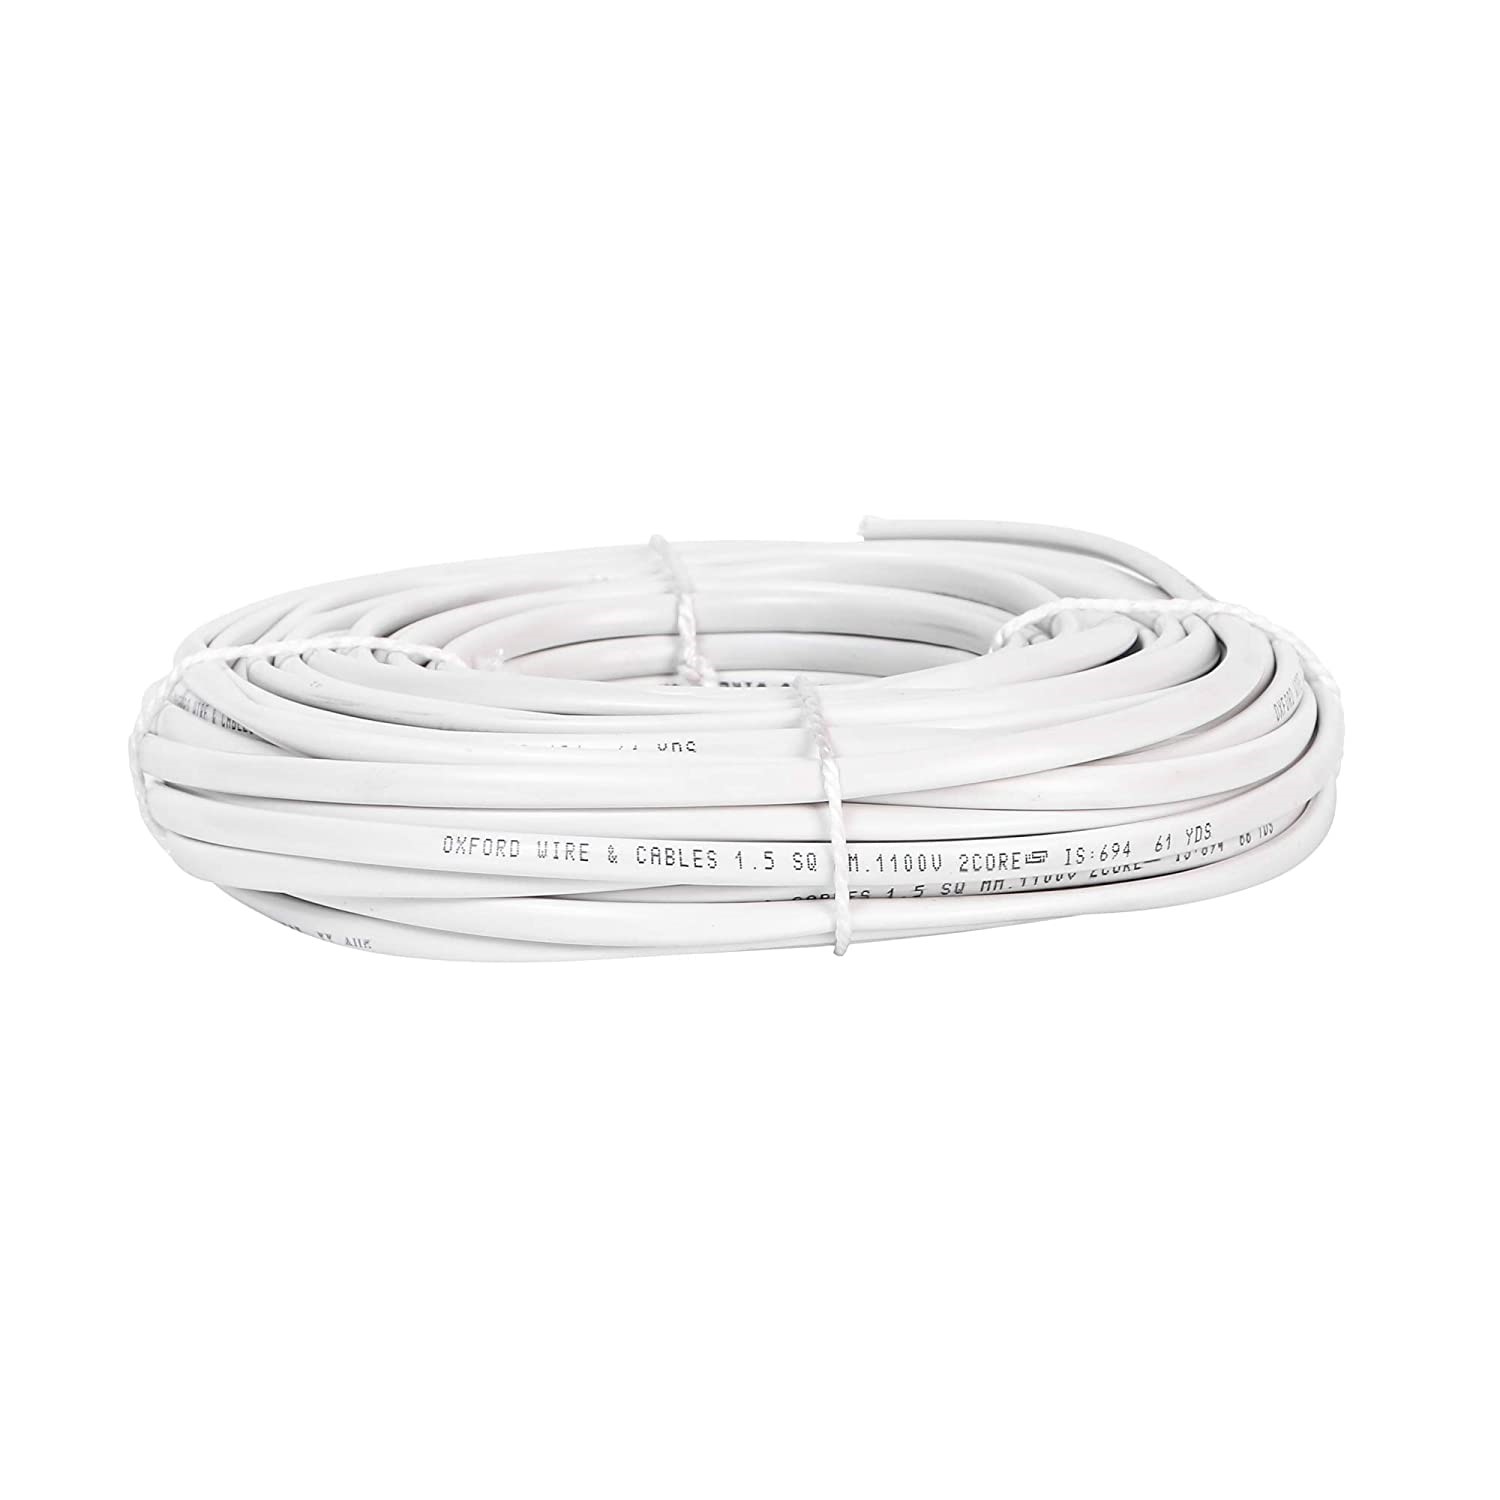 OXCORD Twin Flat 2 core Copper Wires and Cables